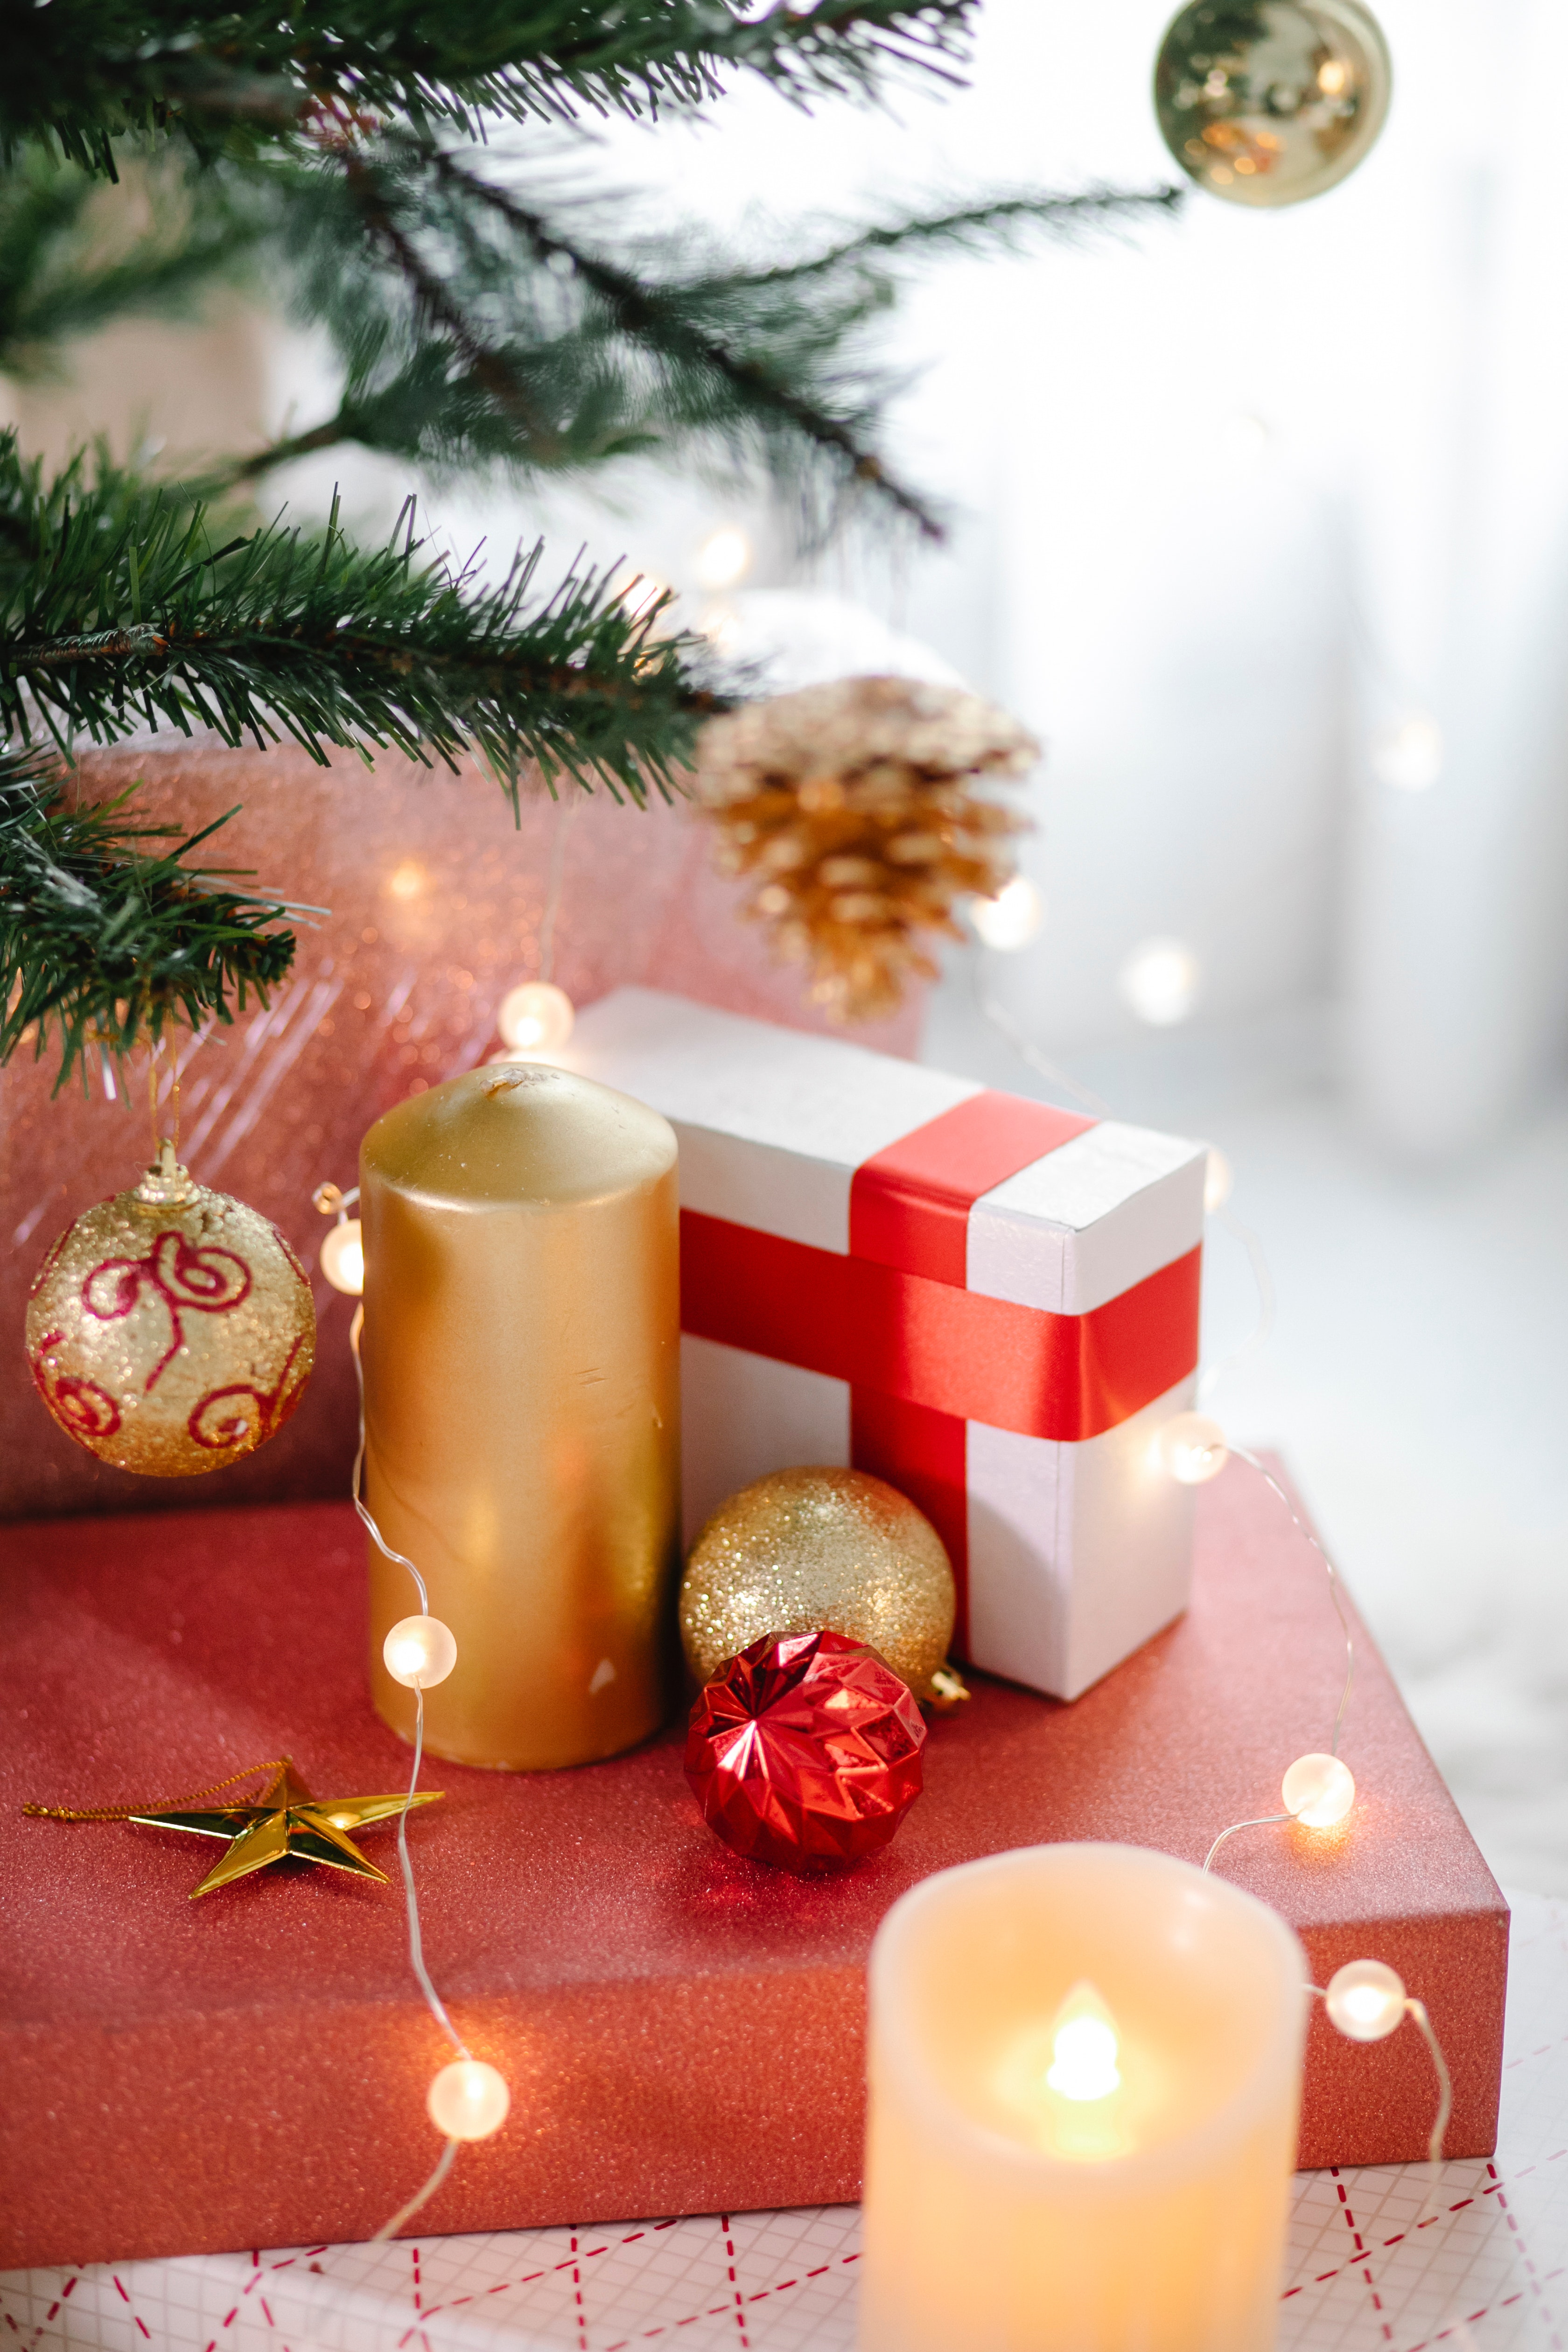 Burning candles and gift boxes during Christmas holiday · Free